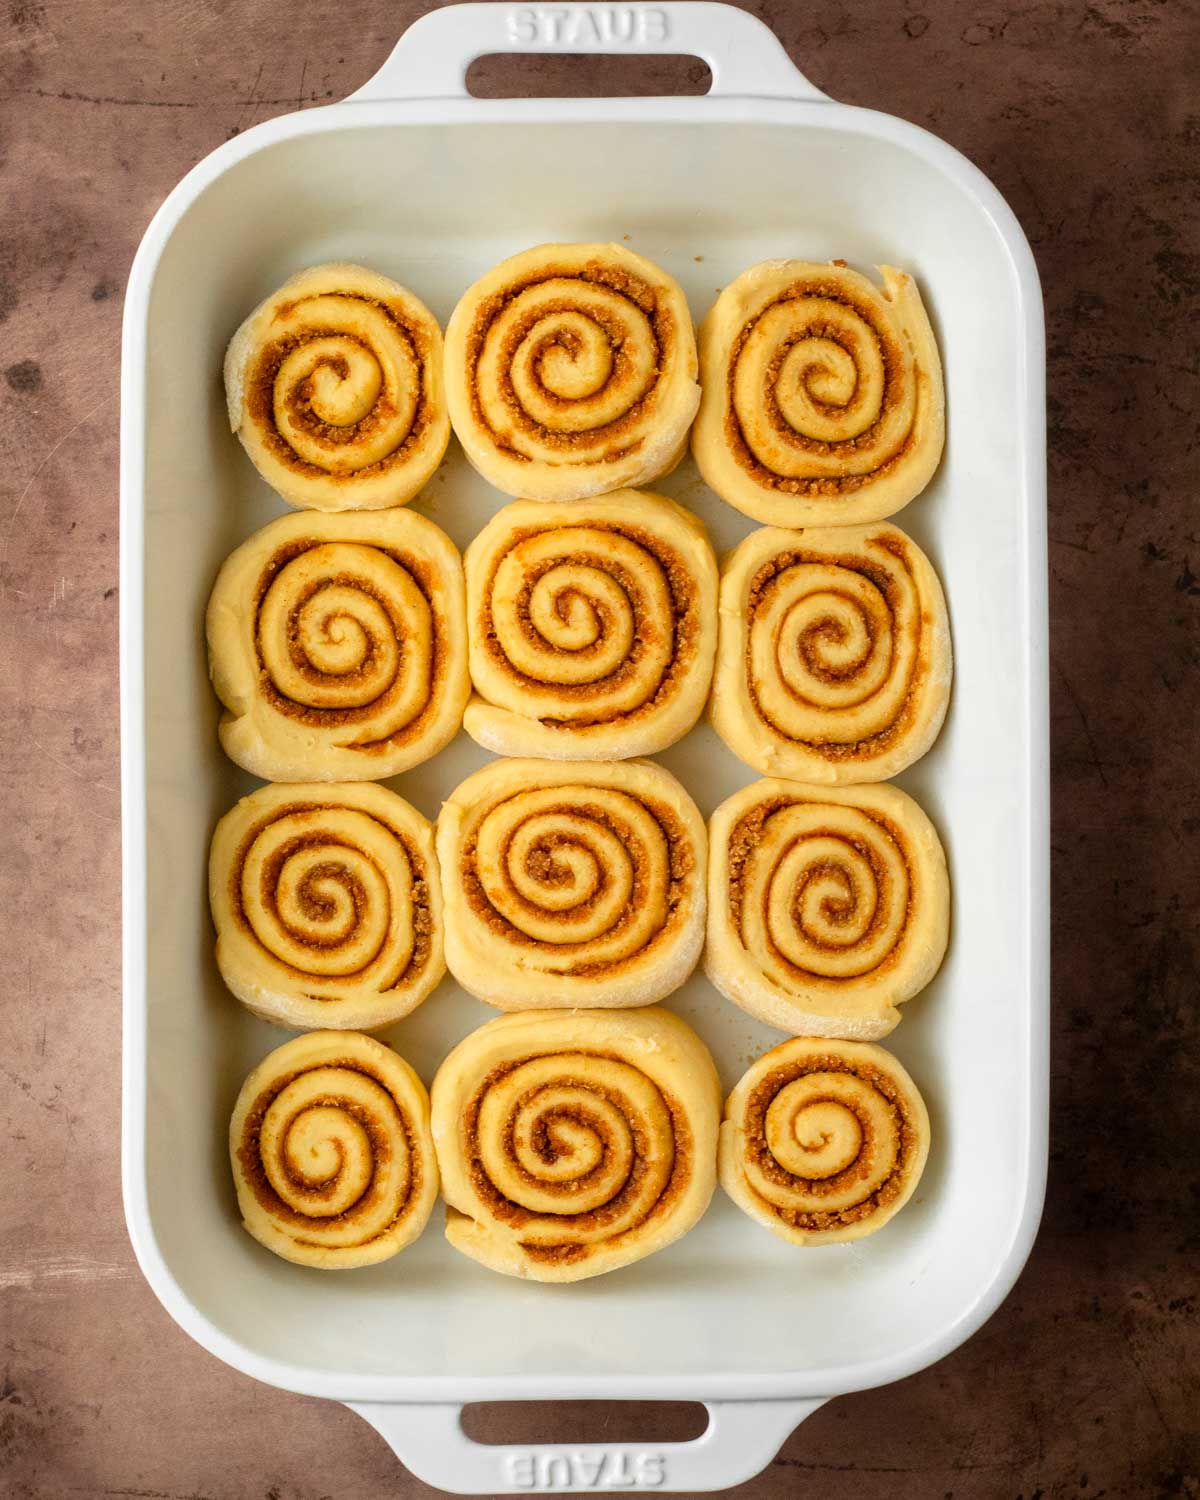 Step 2. Assemble the cinnamon rolls and place in a baking pan.